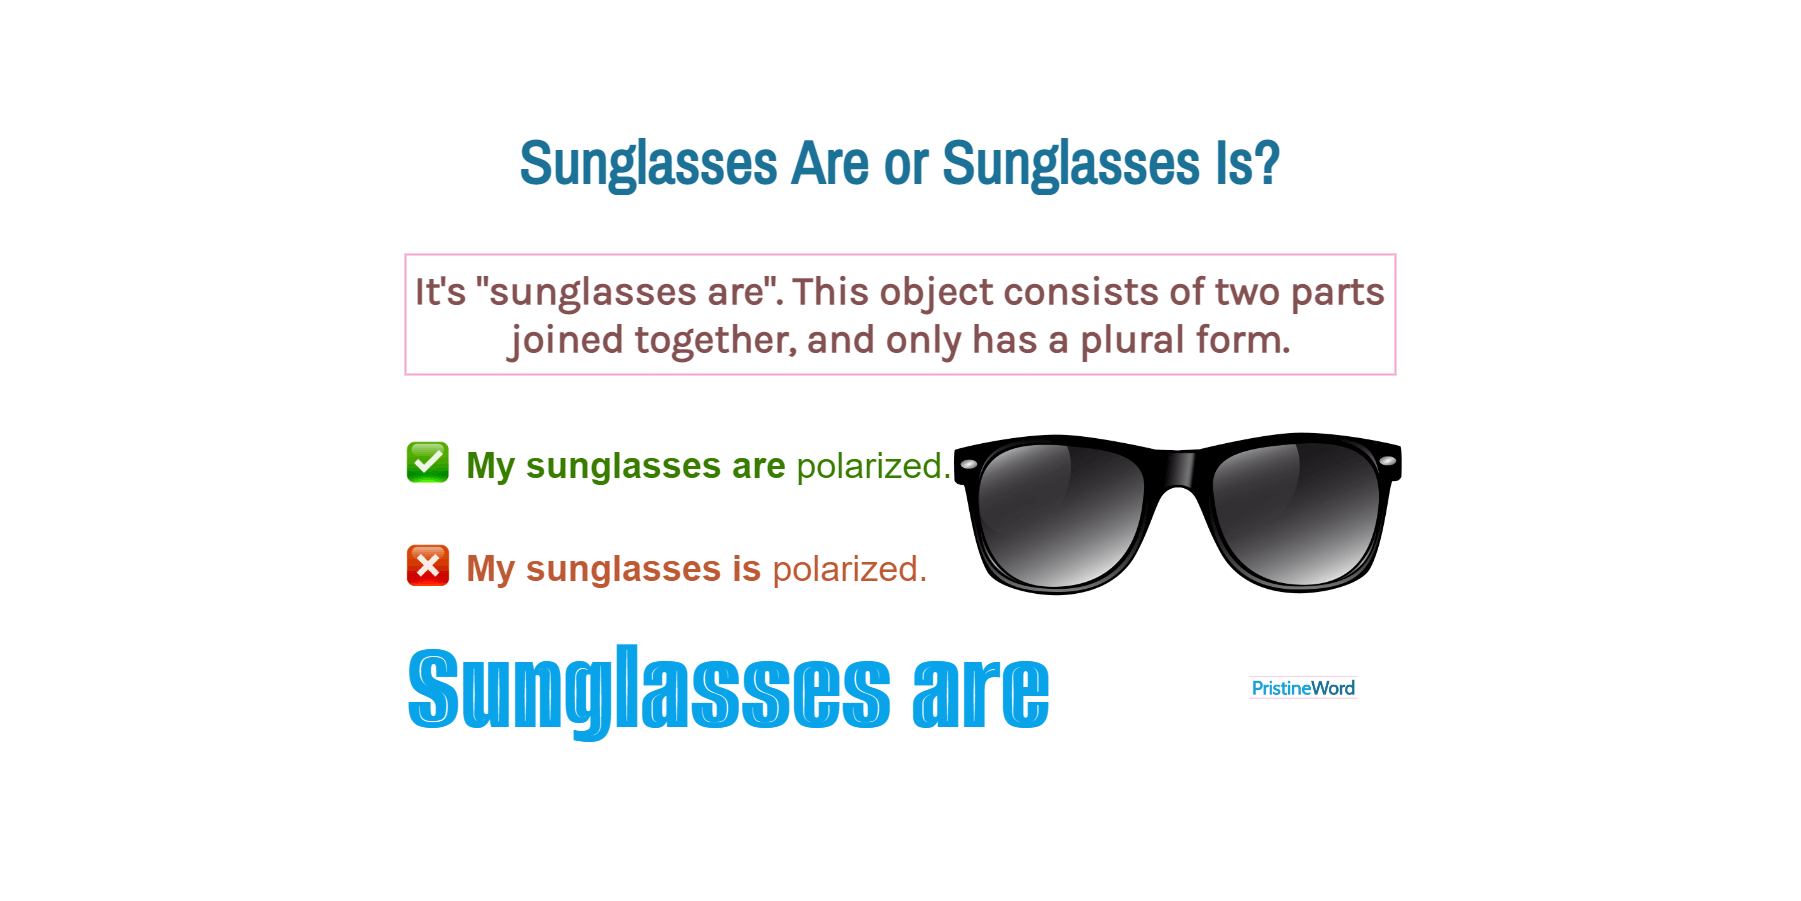 Sunglasses Are Or Sunglasses Is. Which Is Correct?